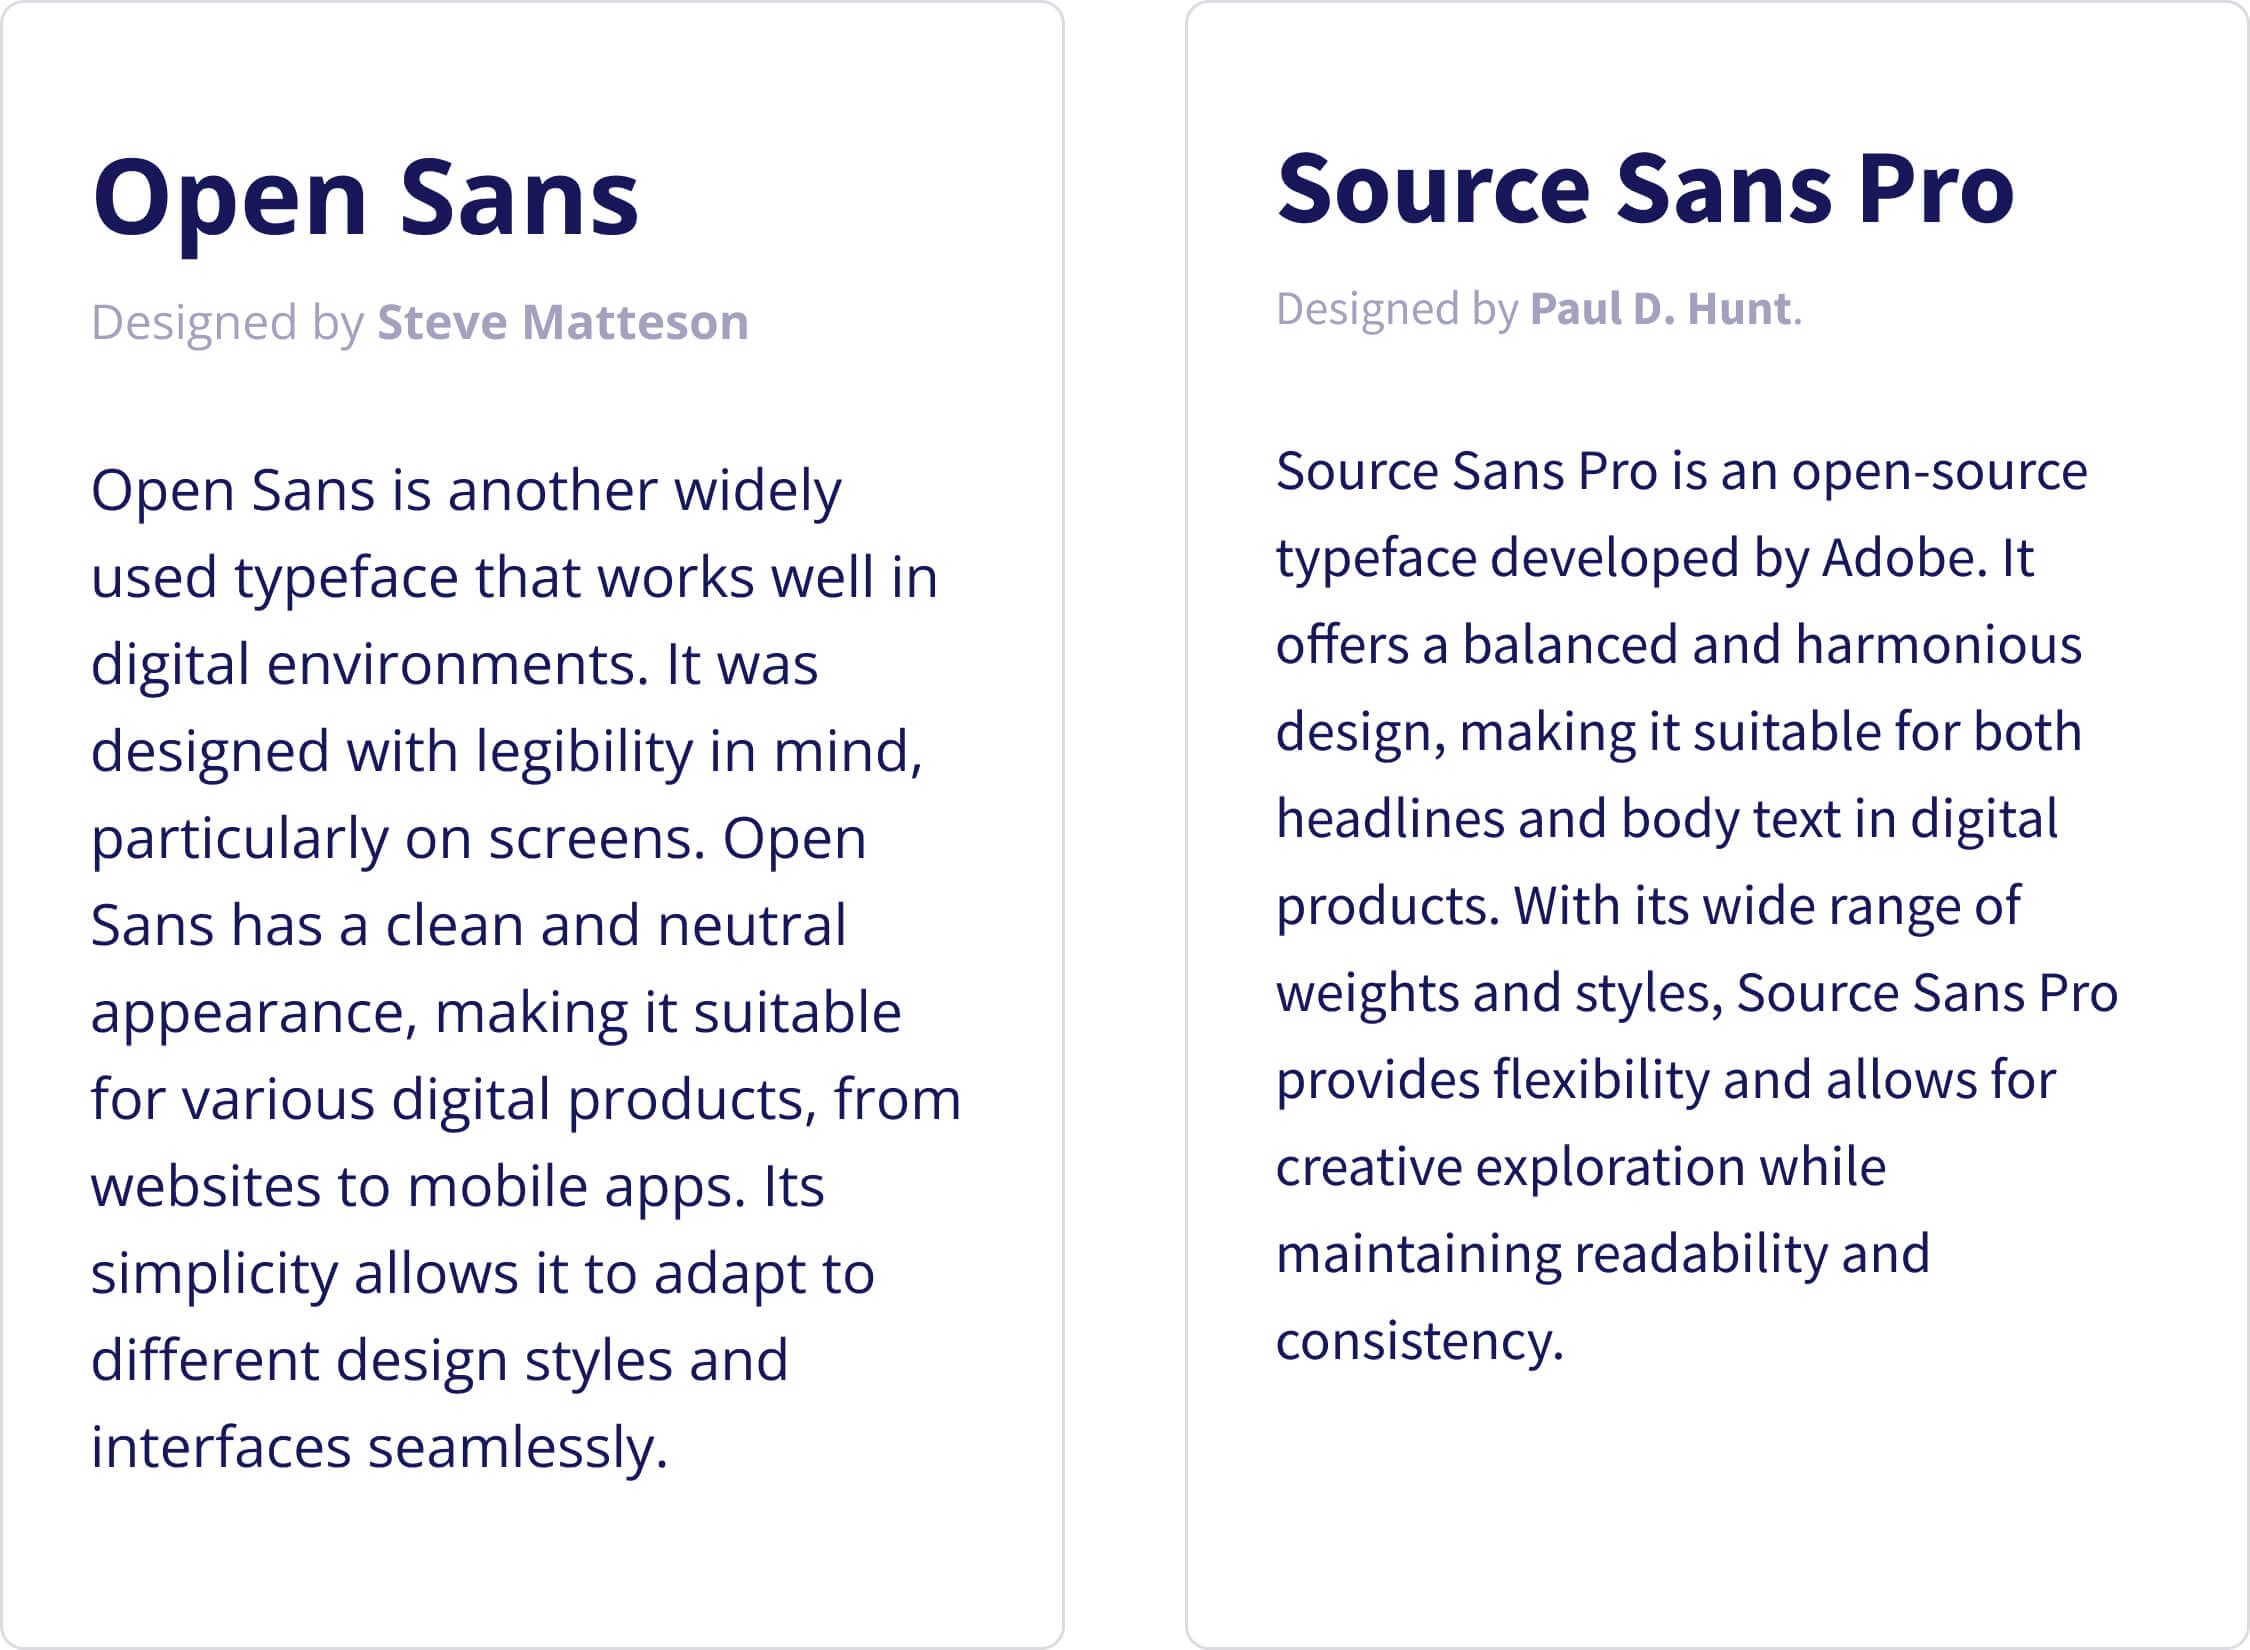 an example of text in open sans & source sans pro typefaces, best for use in digital products